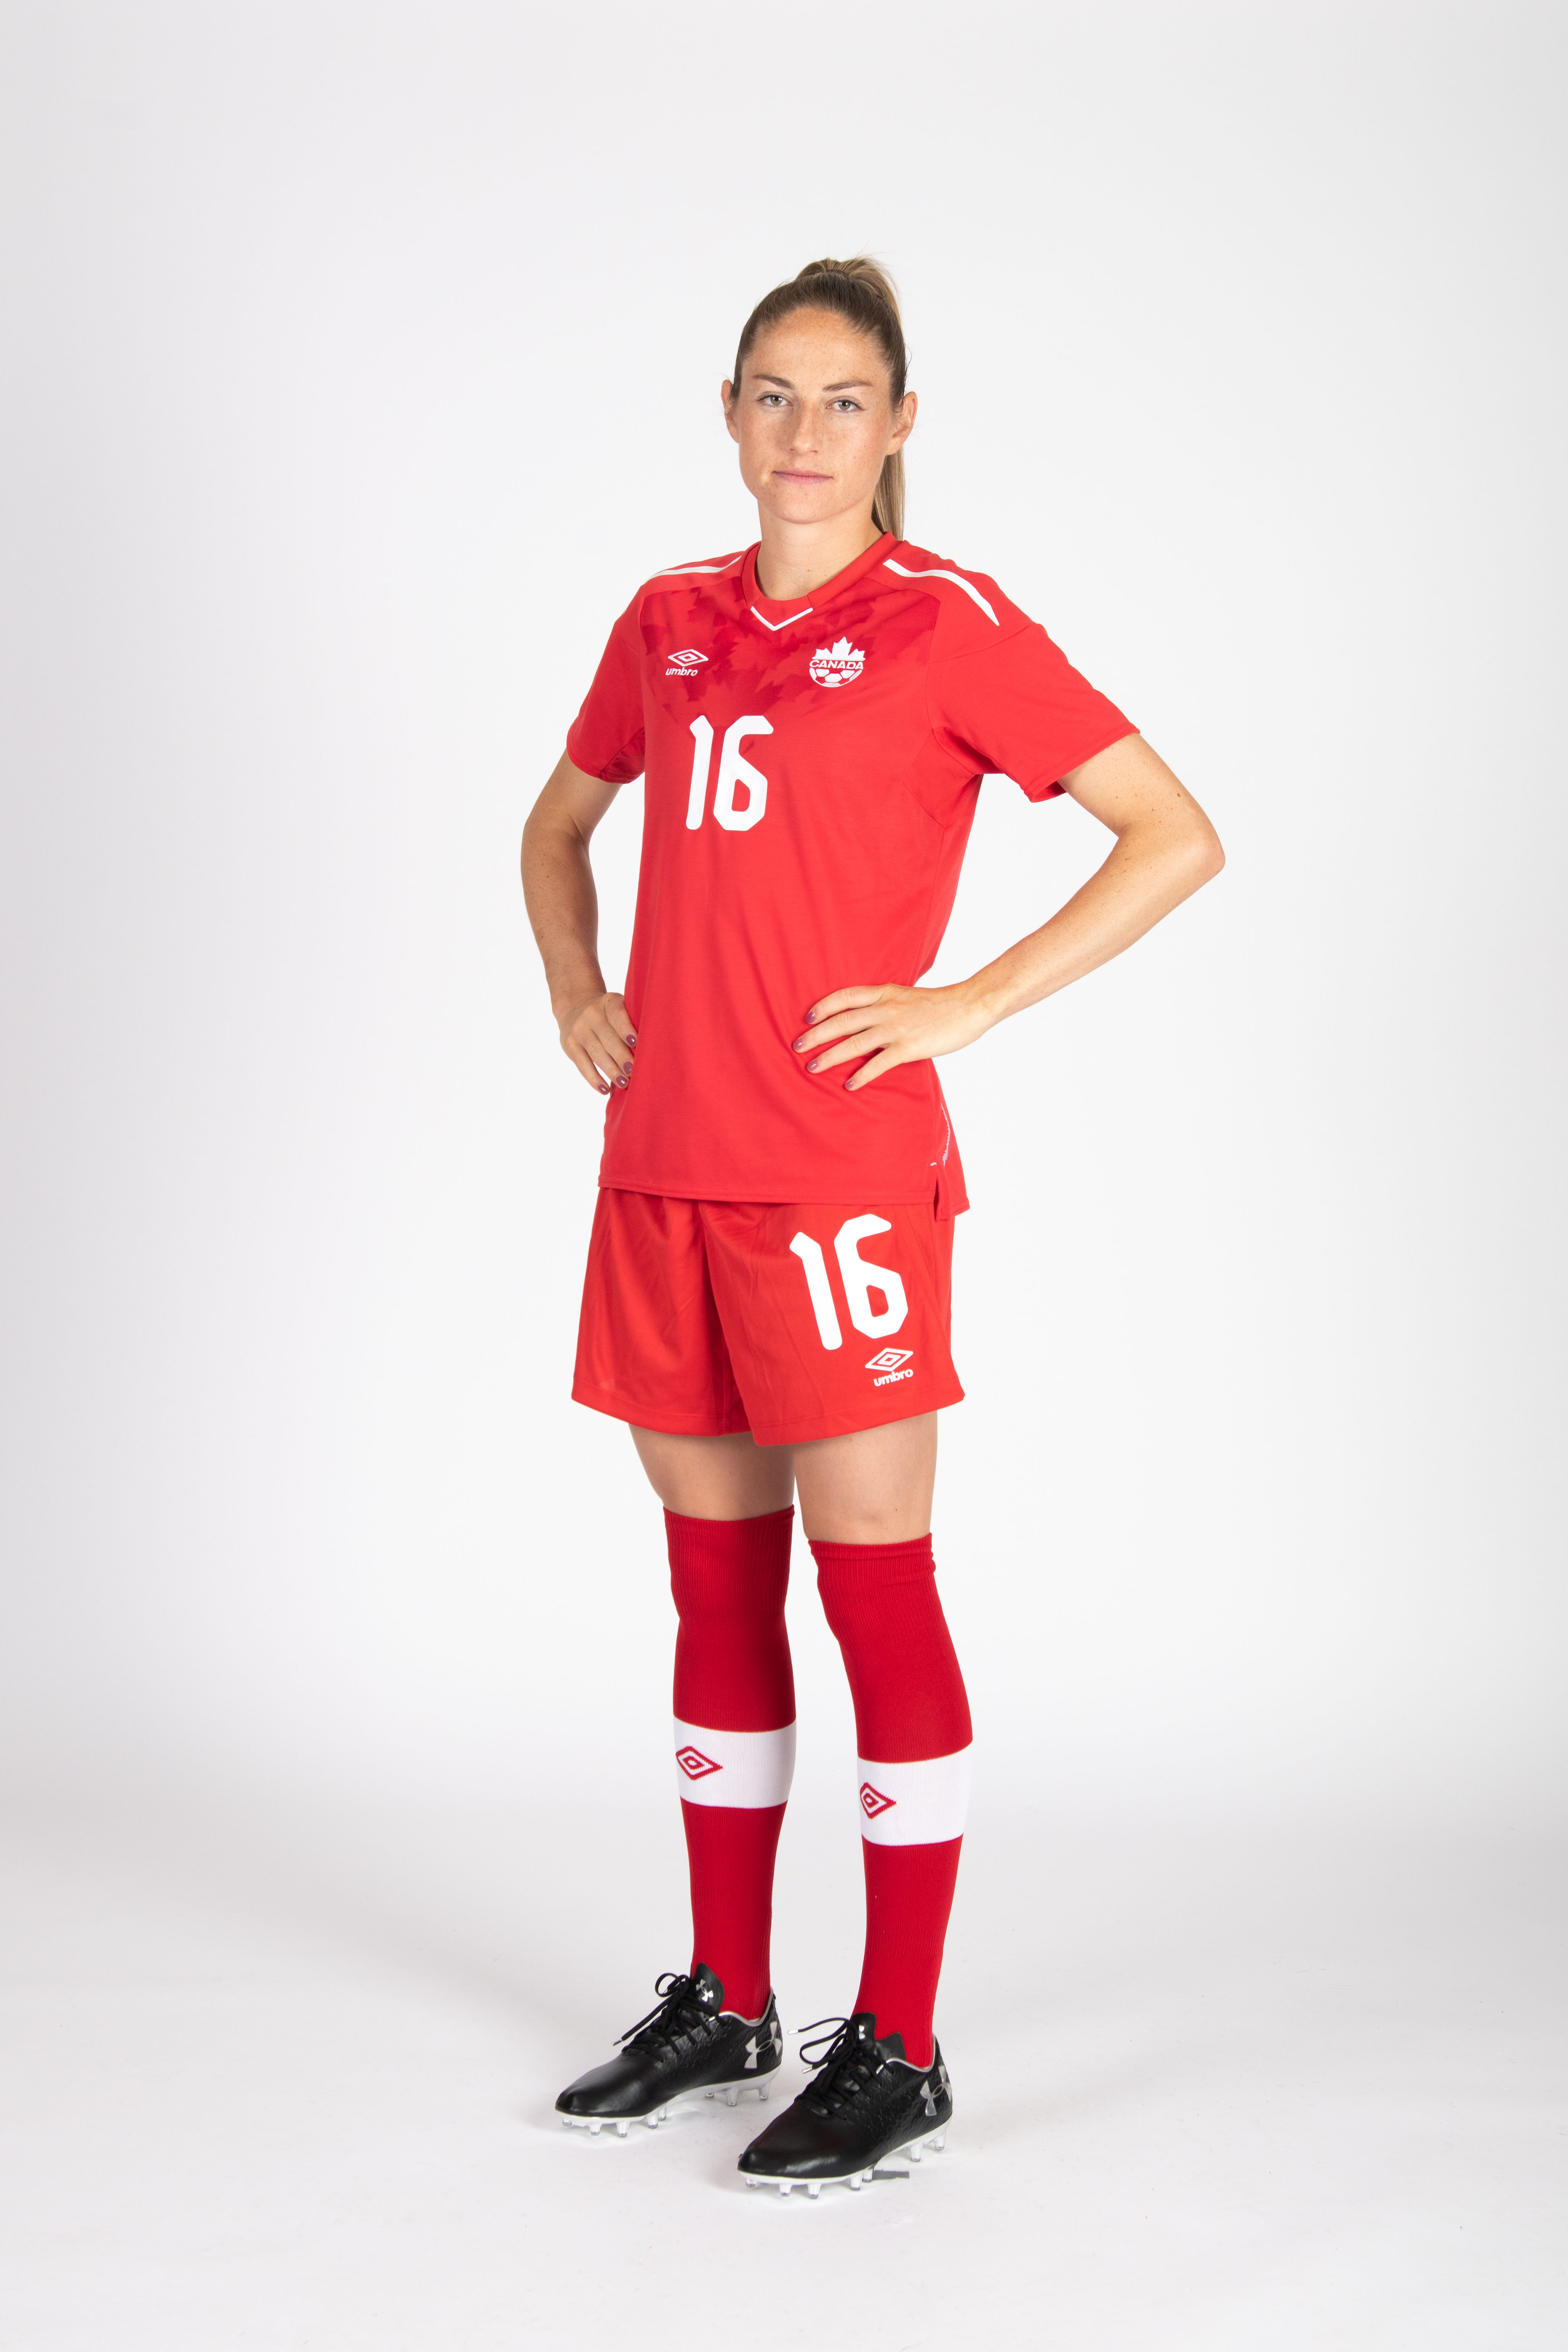 20180604_CANWNT_Beckie_byBazyl23